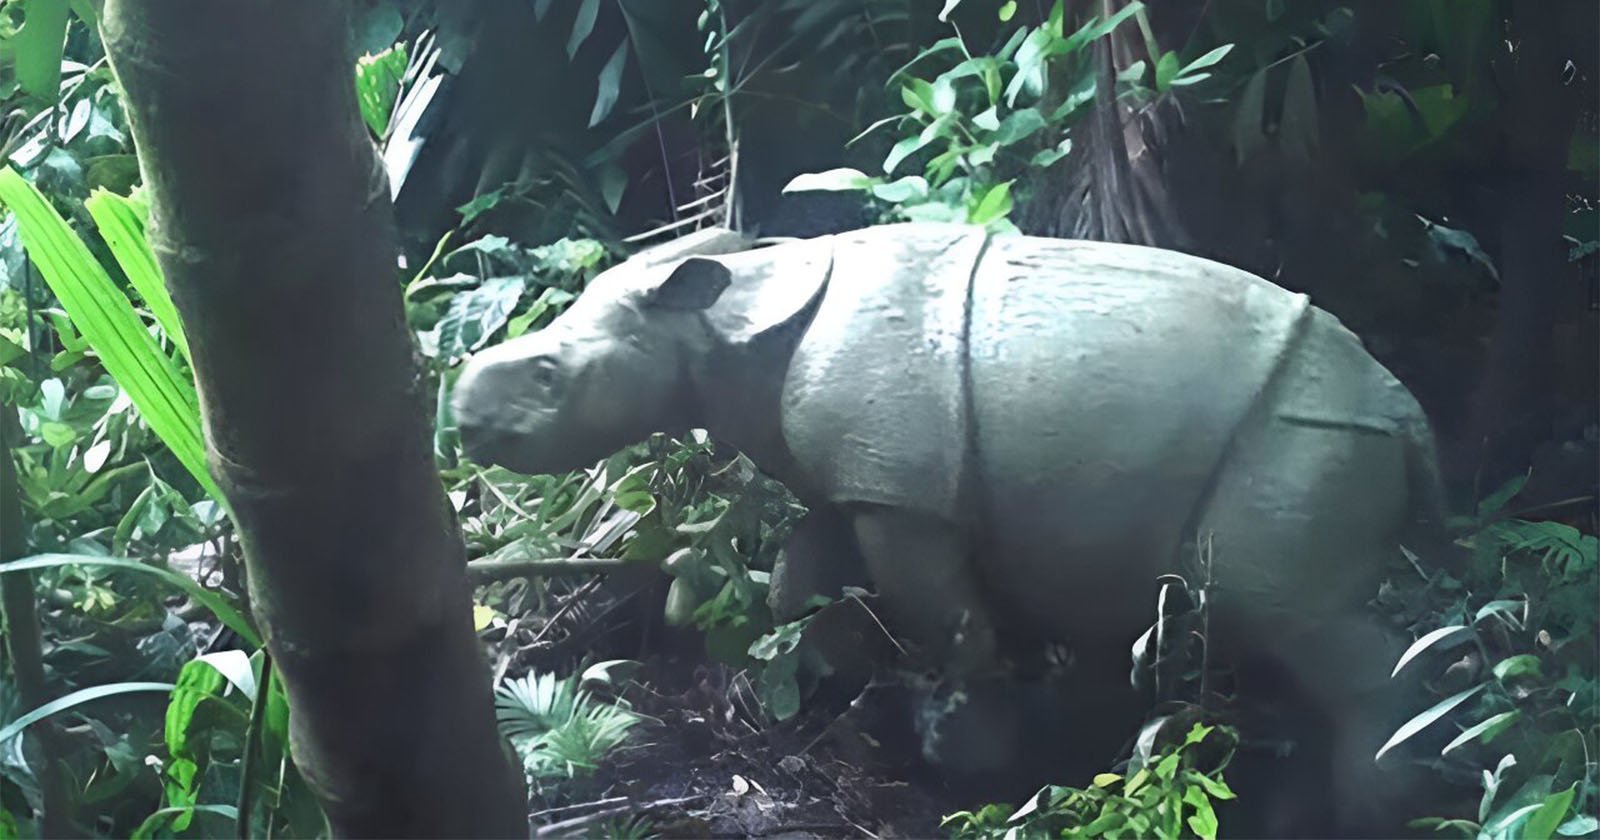  adorable javan rhino calf caught camera one about 